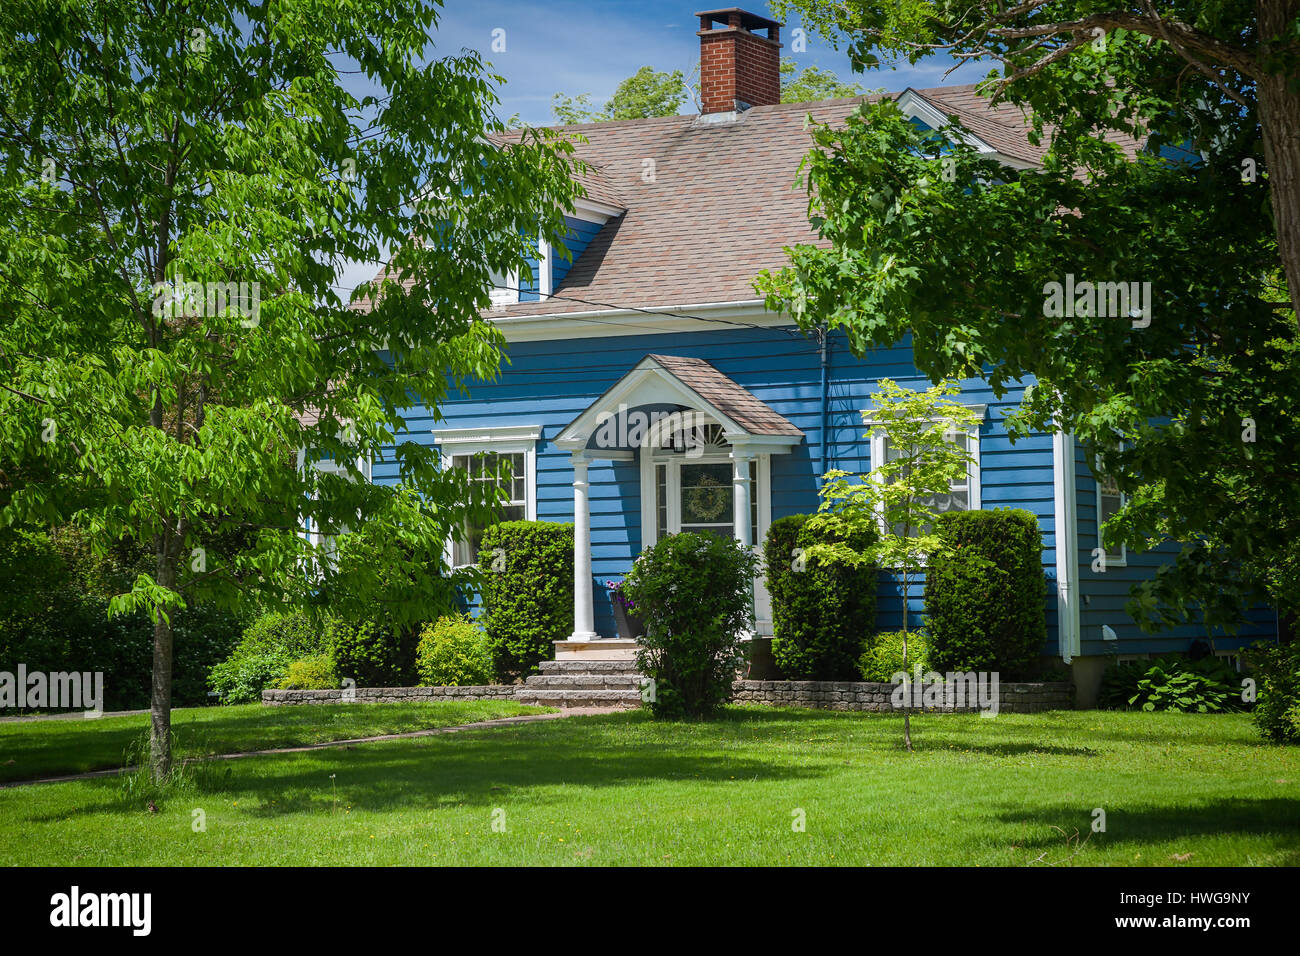 Traditional style older North American home. Stock Photo